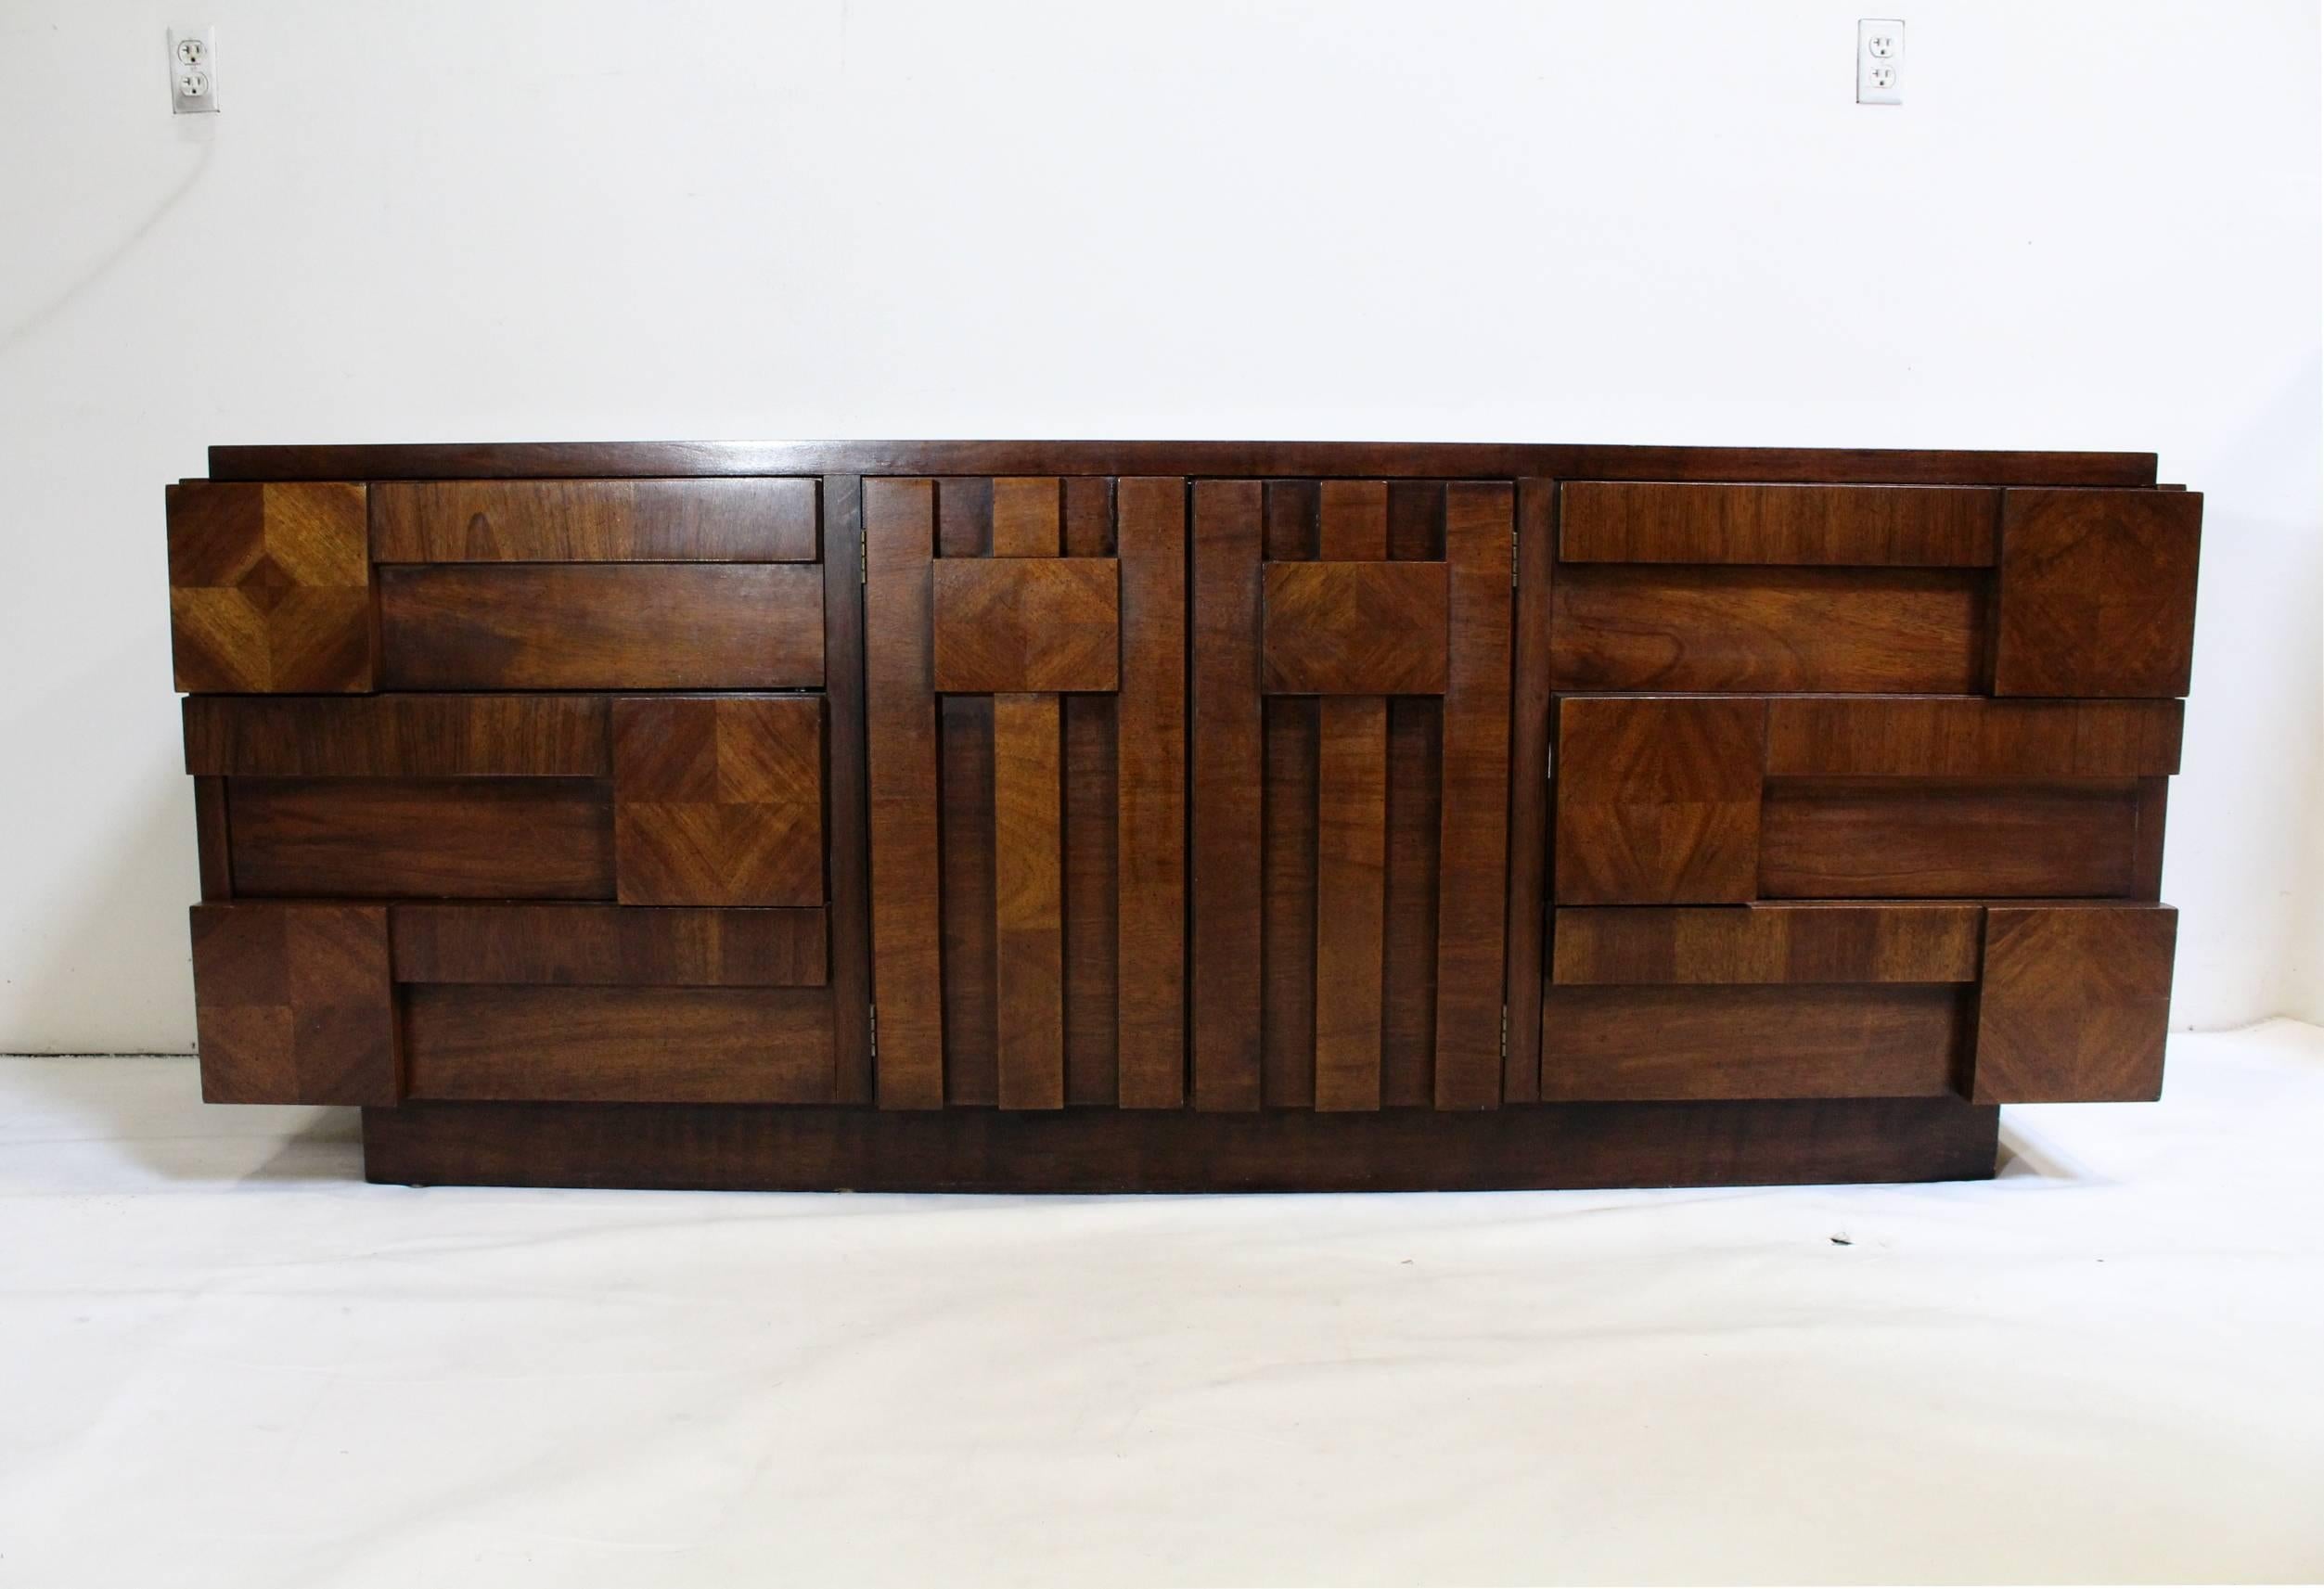 Iconic and sought-after, nine drawer, Brutalist credenza or dresser by Lane Furniture. Stamp on back dates it to 1973. Light surface wear consistent with age. Has a small chip on top left (pictured).